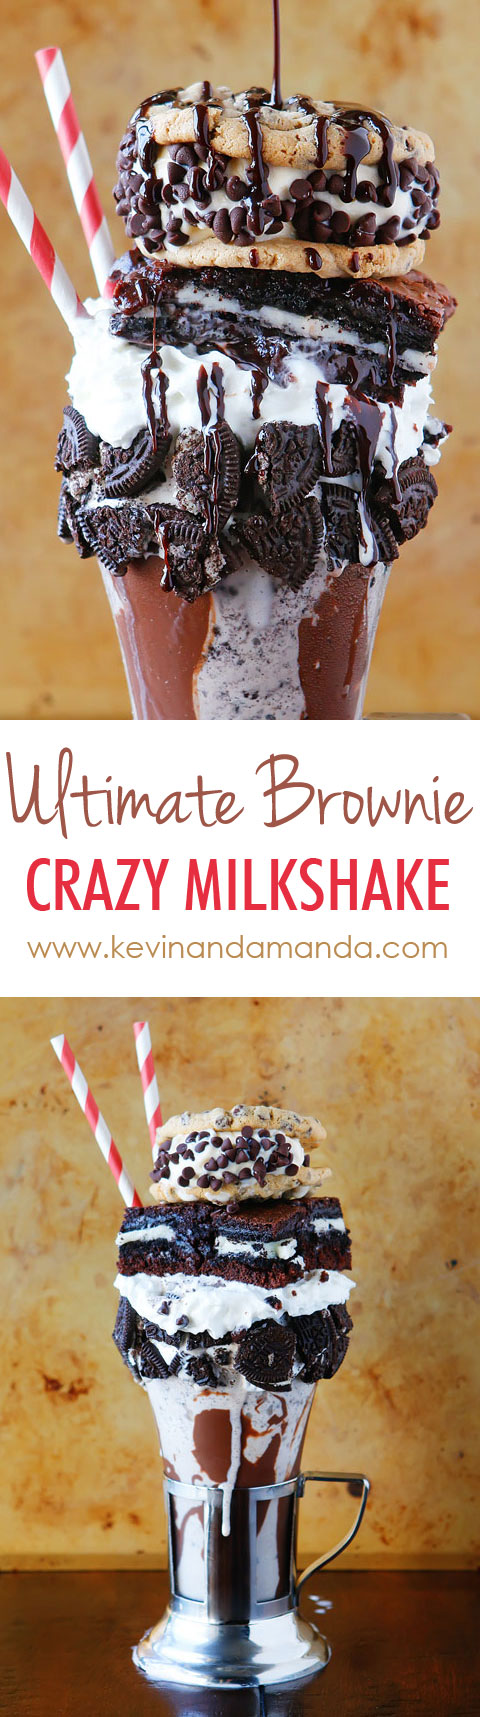 Crazy milkshakes are all the hype in NYC, London, and Australia. Now you can skip the cross country flight AND 4-5 hour wait in line and make them right at home!! Such a fun idea for a party. MUST try this!!